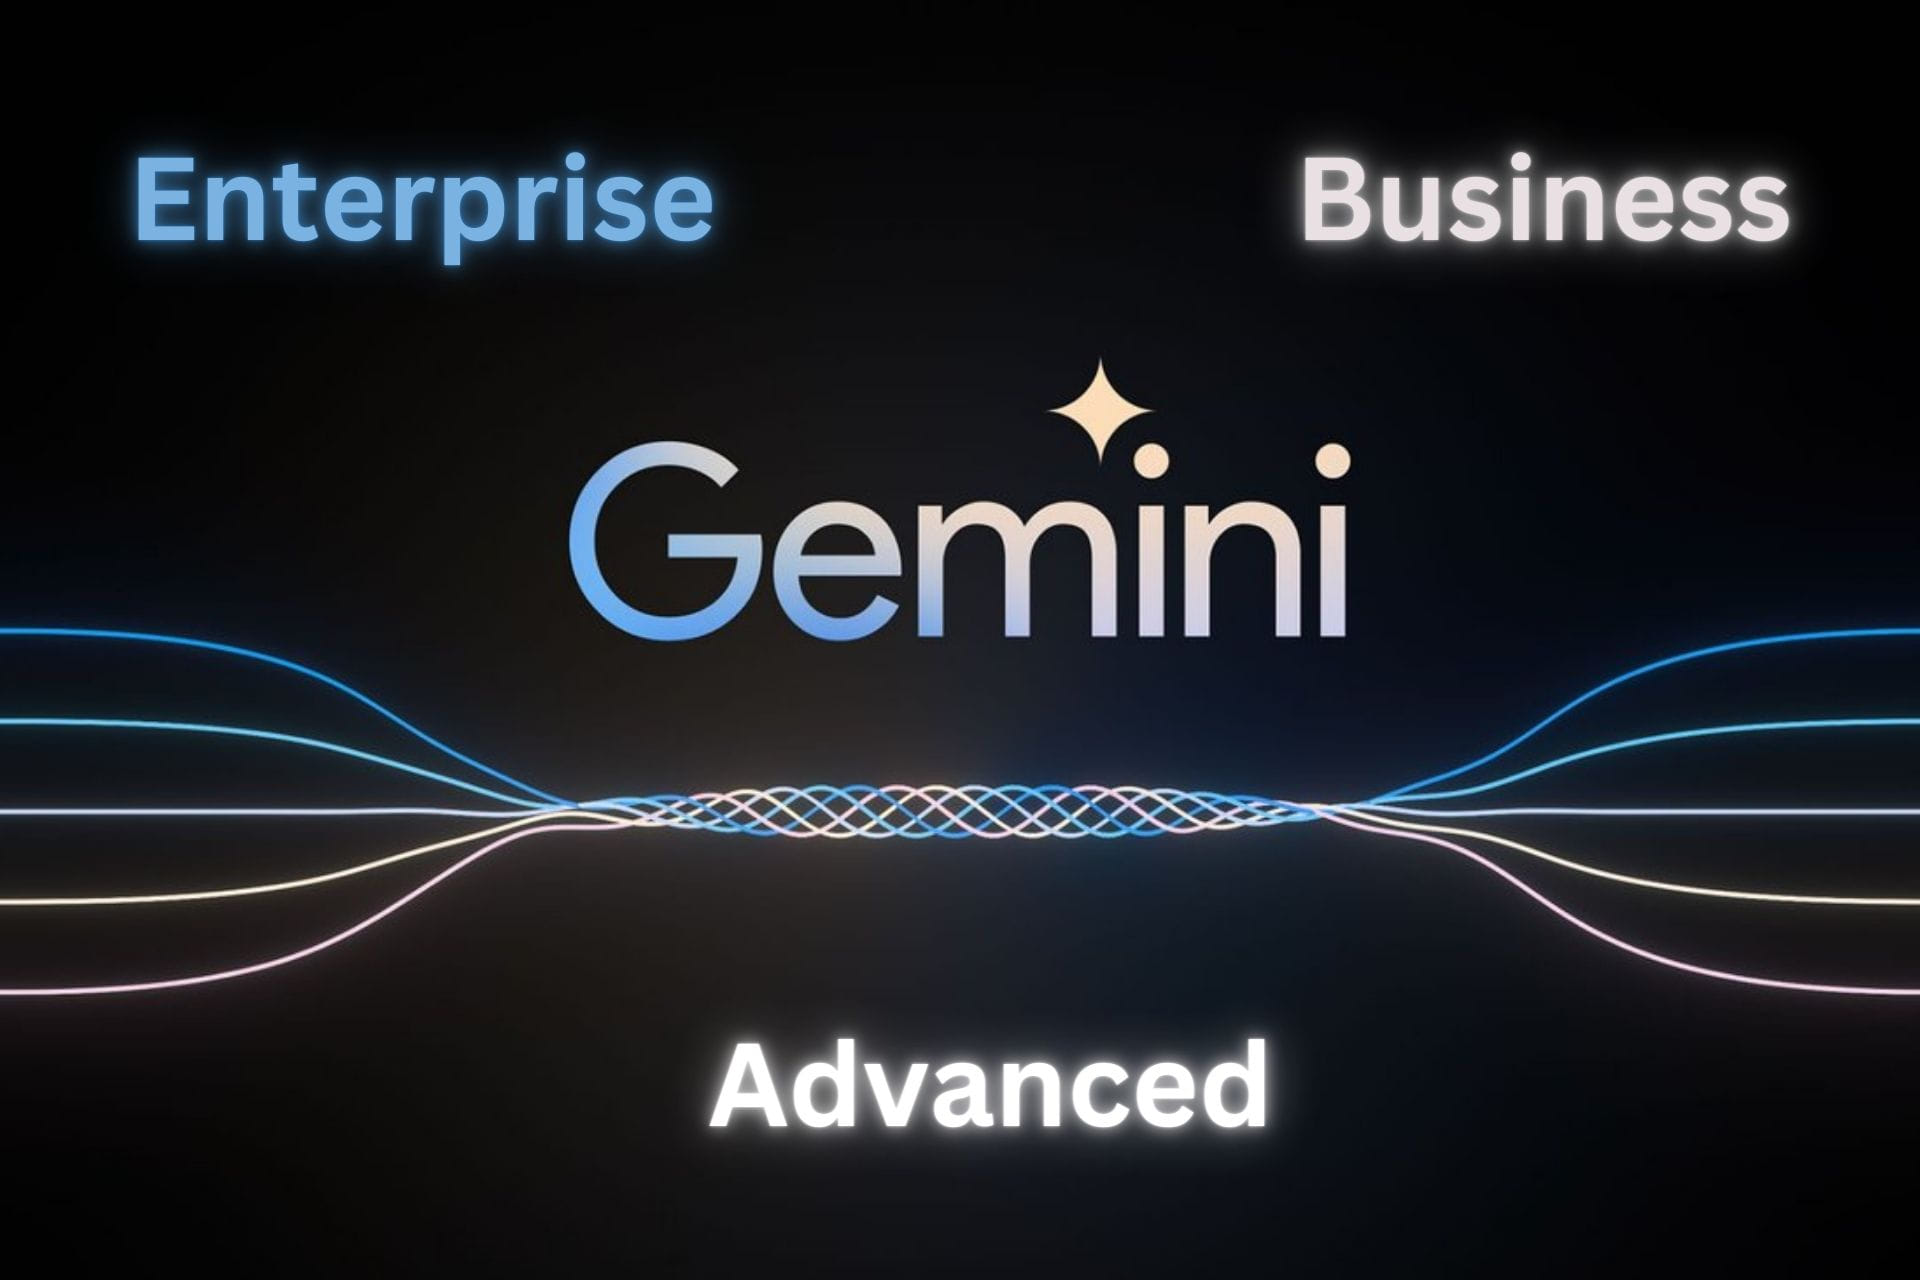 Gemini Background featuring the Enterprise, Business, and Advanced versions